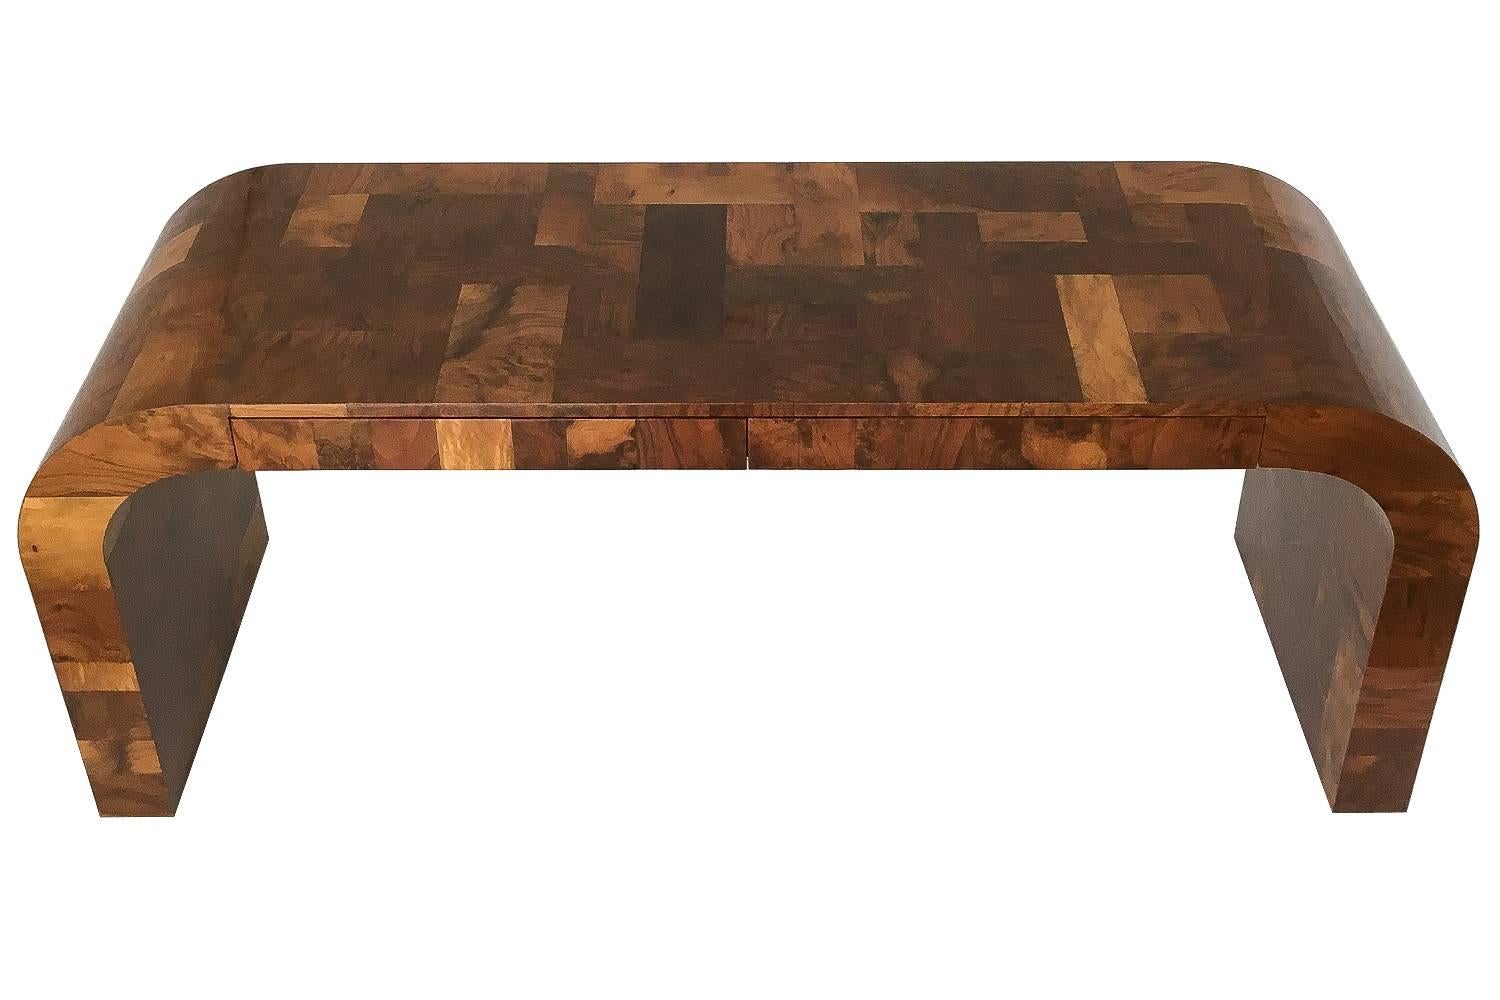 Paul Evans patchwork cityscape console table or writing desk in a rich walnut toned burl wood for Directional Furniture, circa 1970s. Waterfall design with two drawers that can be used as either a console table or desk. Original high gloss lacquered